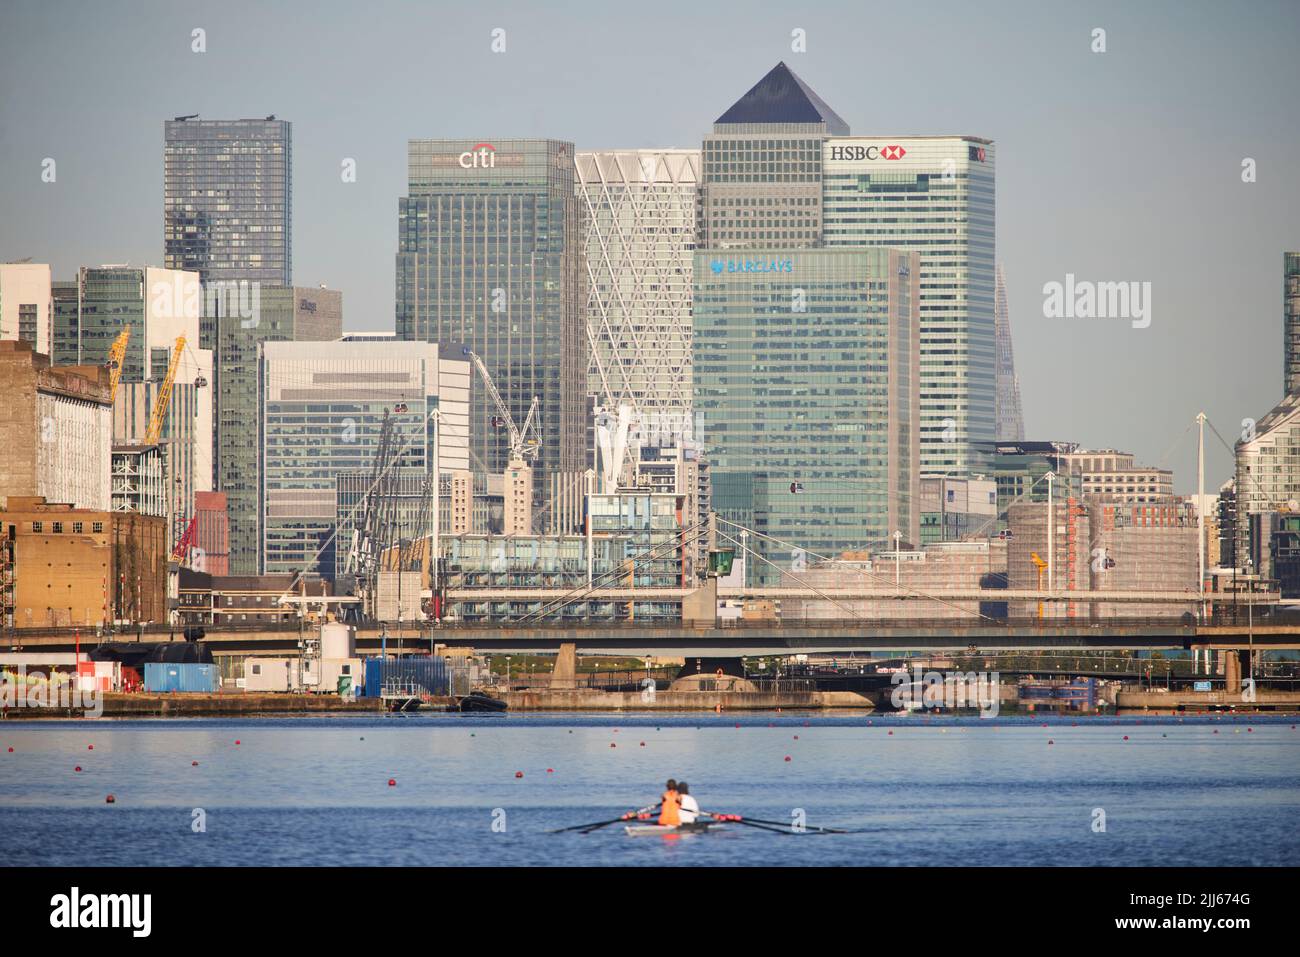 London Royal Albert Dock in Docklands area looking towards the business skyline of Canary Wharf Stock Photo